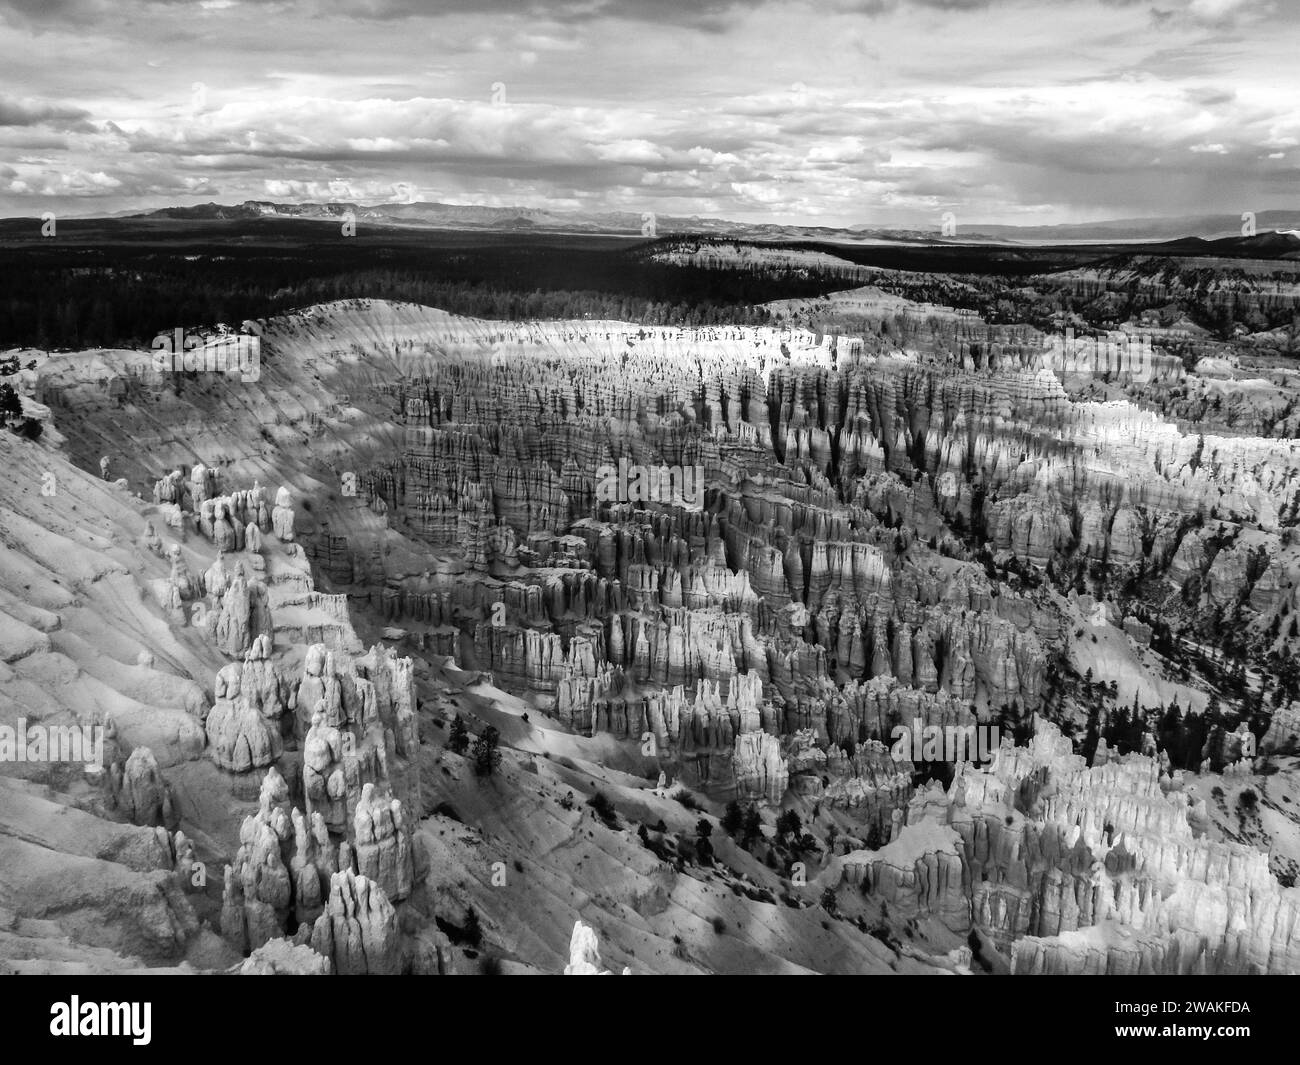 One of the Hoodoo filled amphitheatres of Bryce Canyon National Park in Black and White Stock Photo